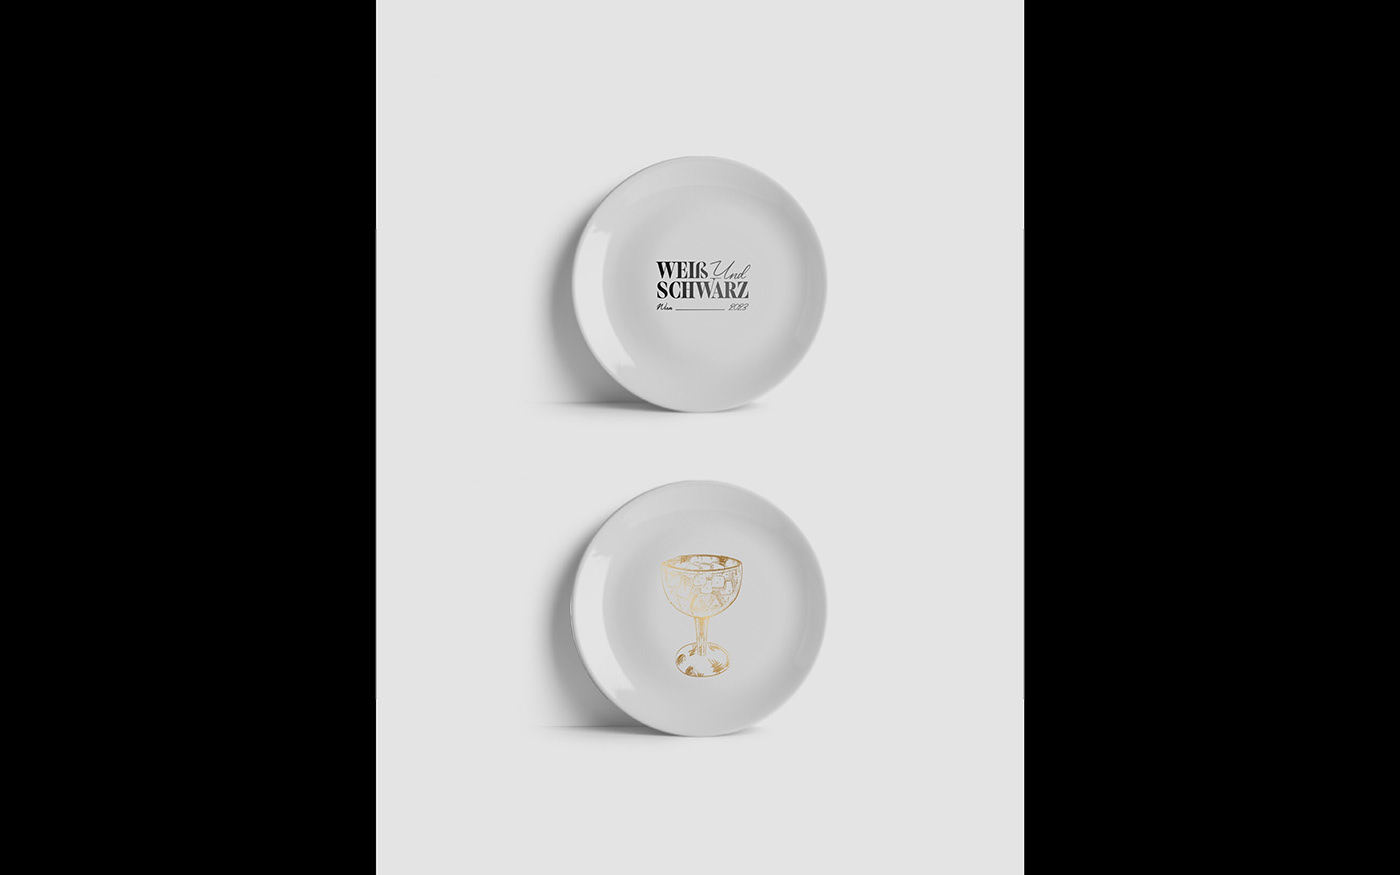 Plates for a coctail-bar in Vienna